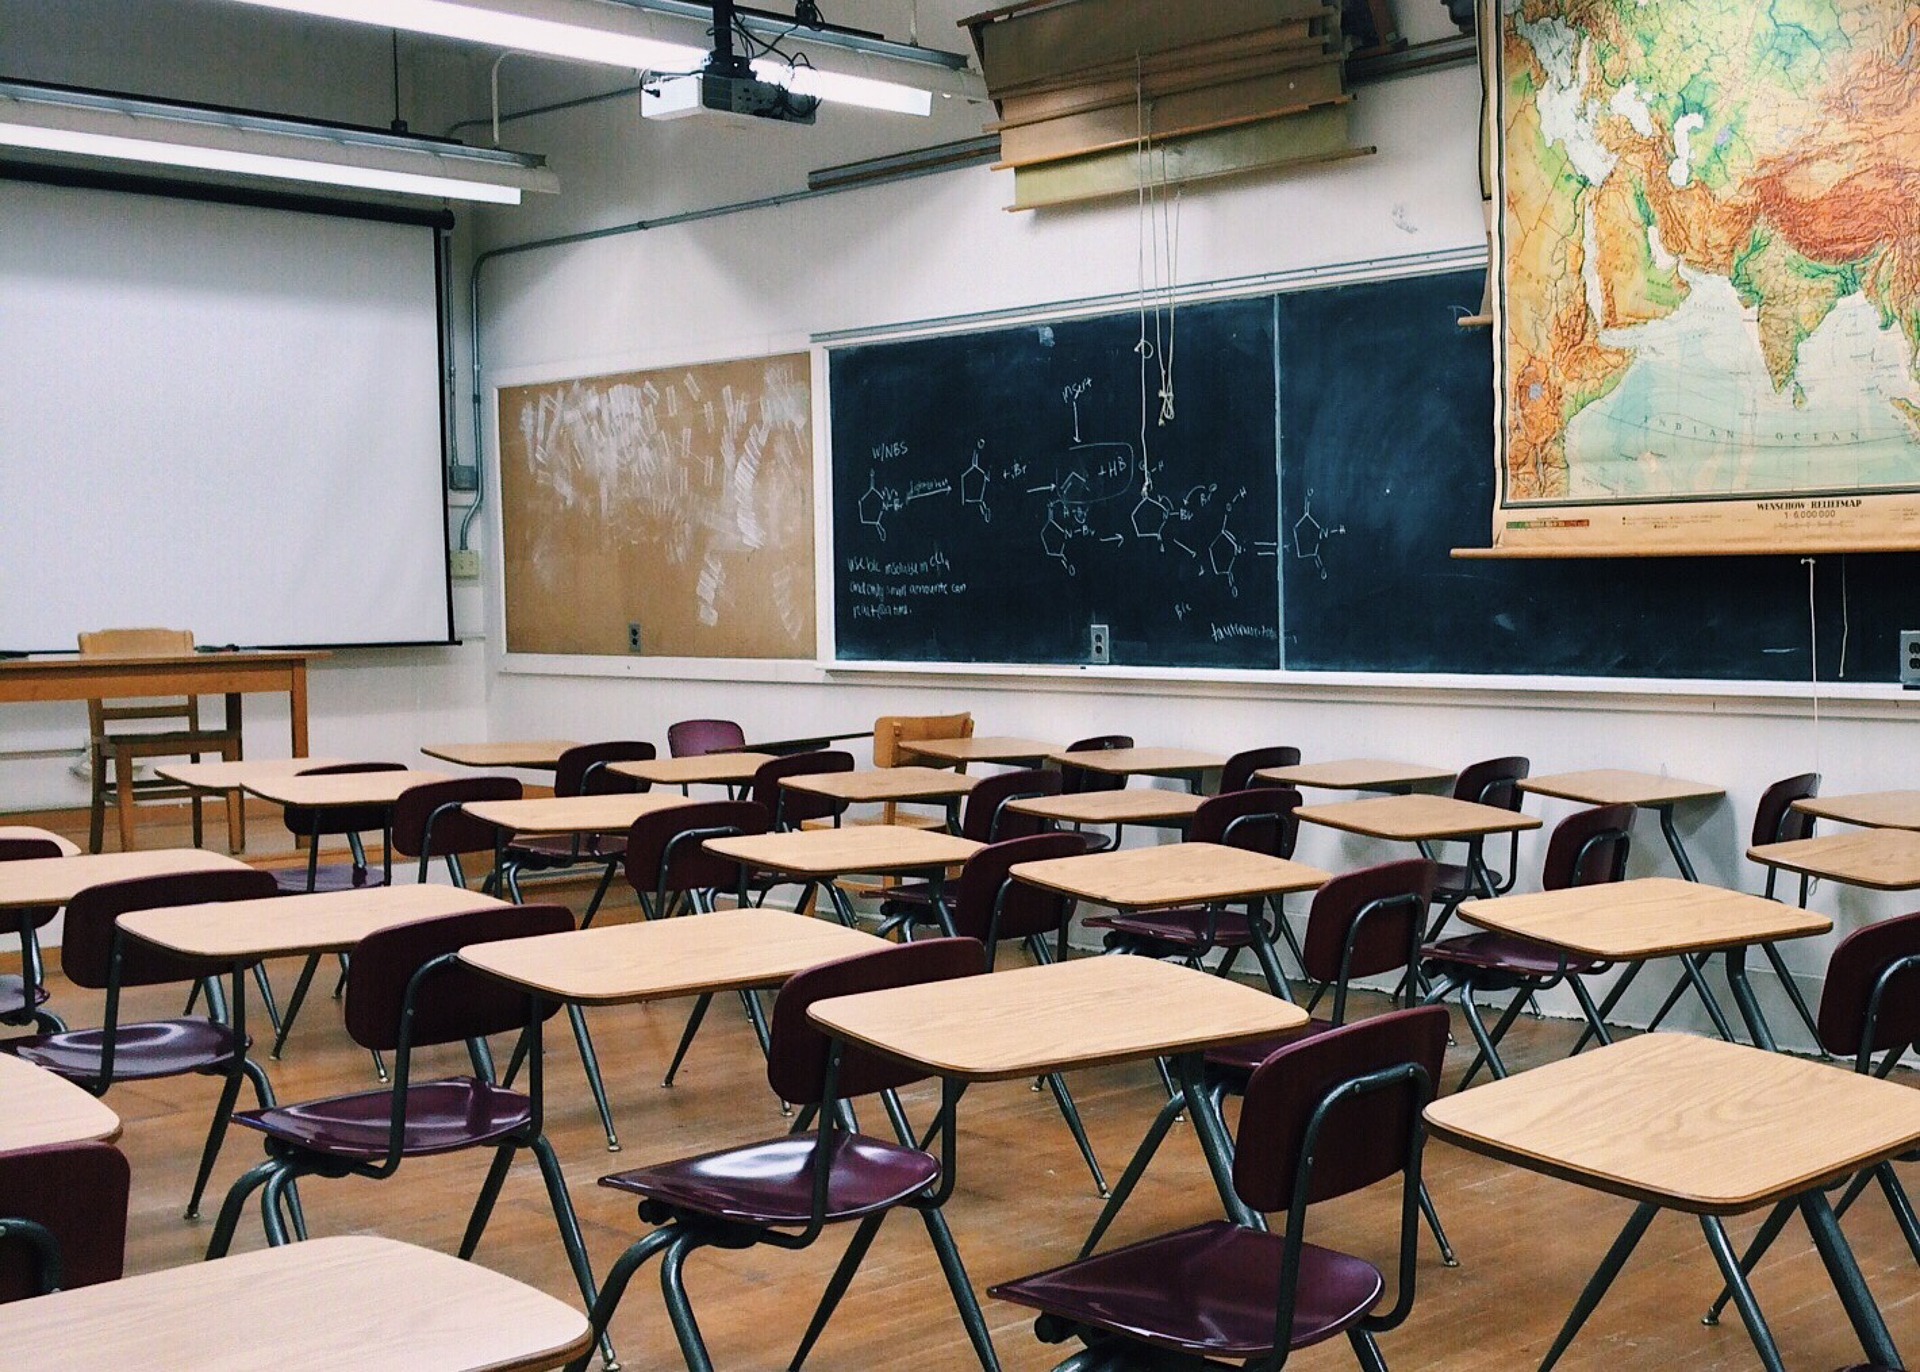 Empty classroom with desks and blackboards.